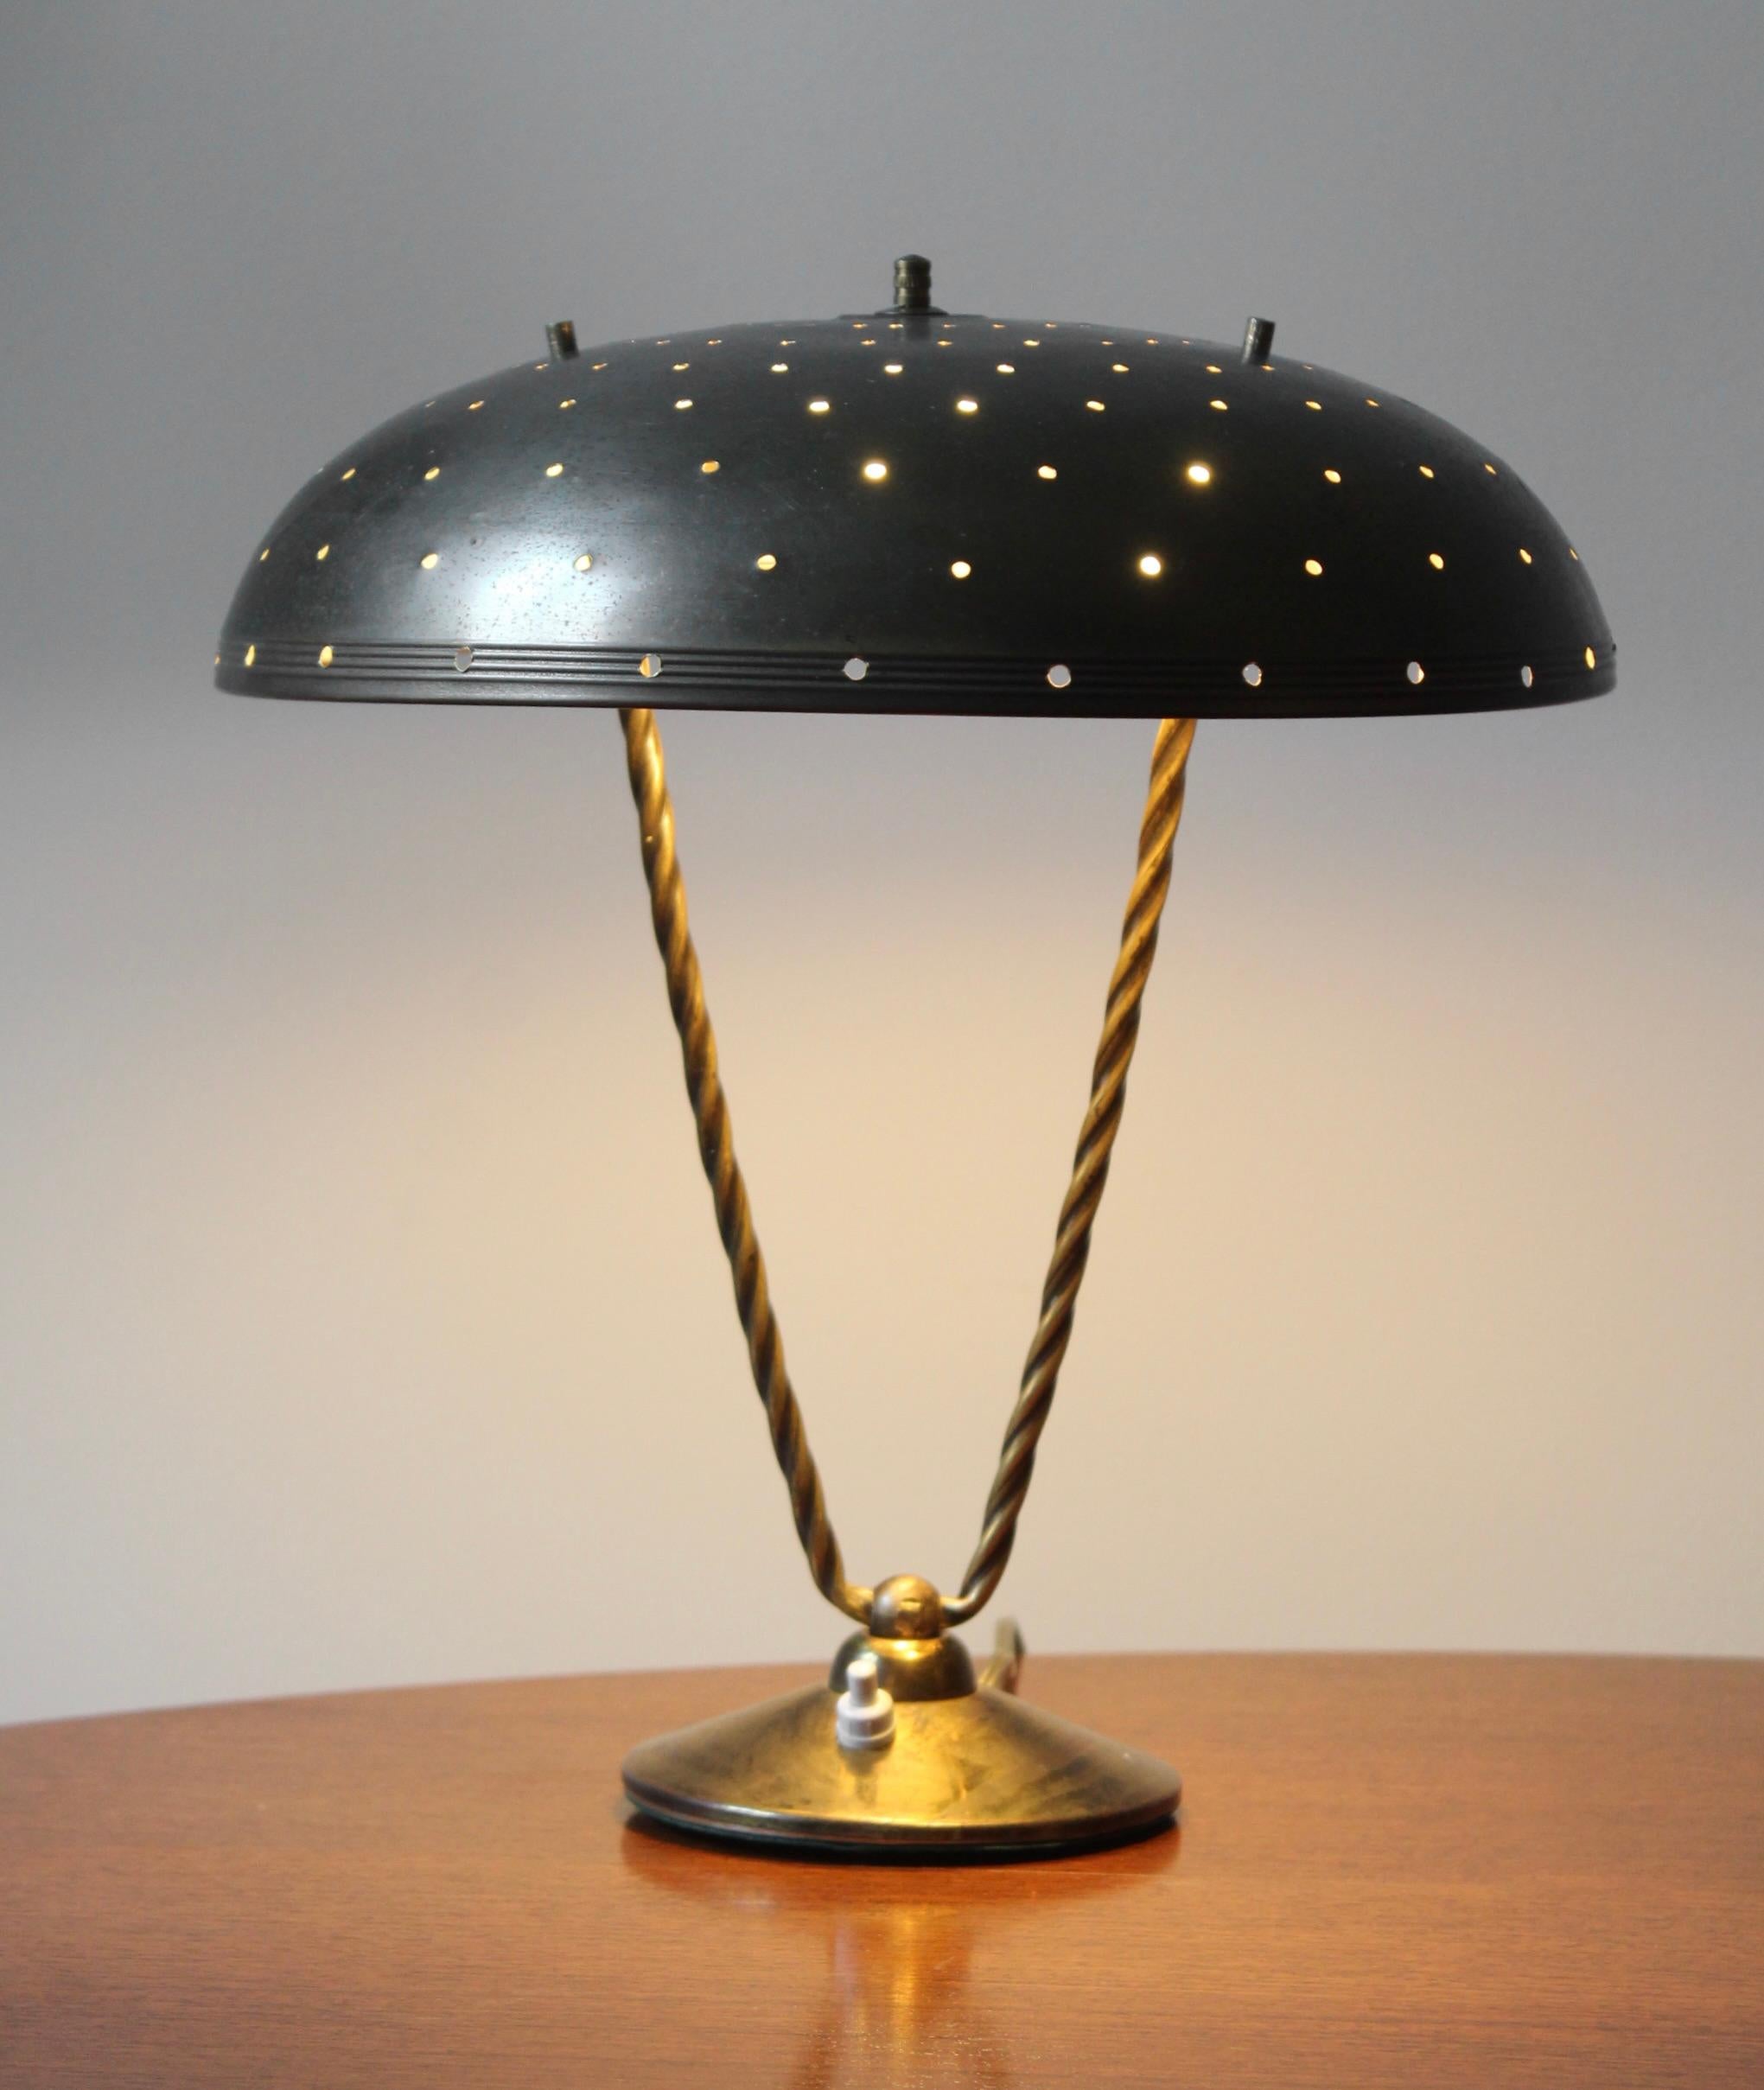 A brass table lamp, design and production attributed to Lightolier, United States, 1950s.